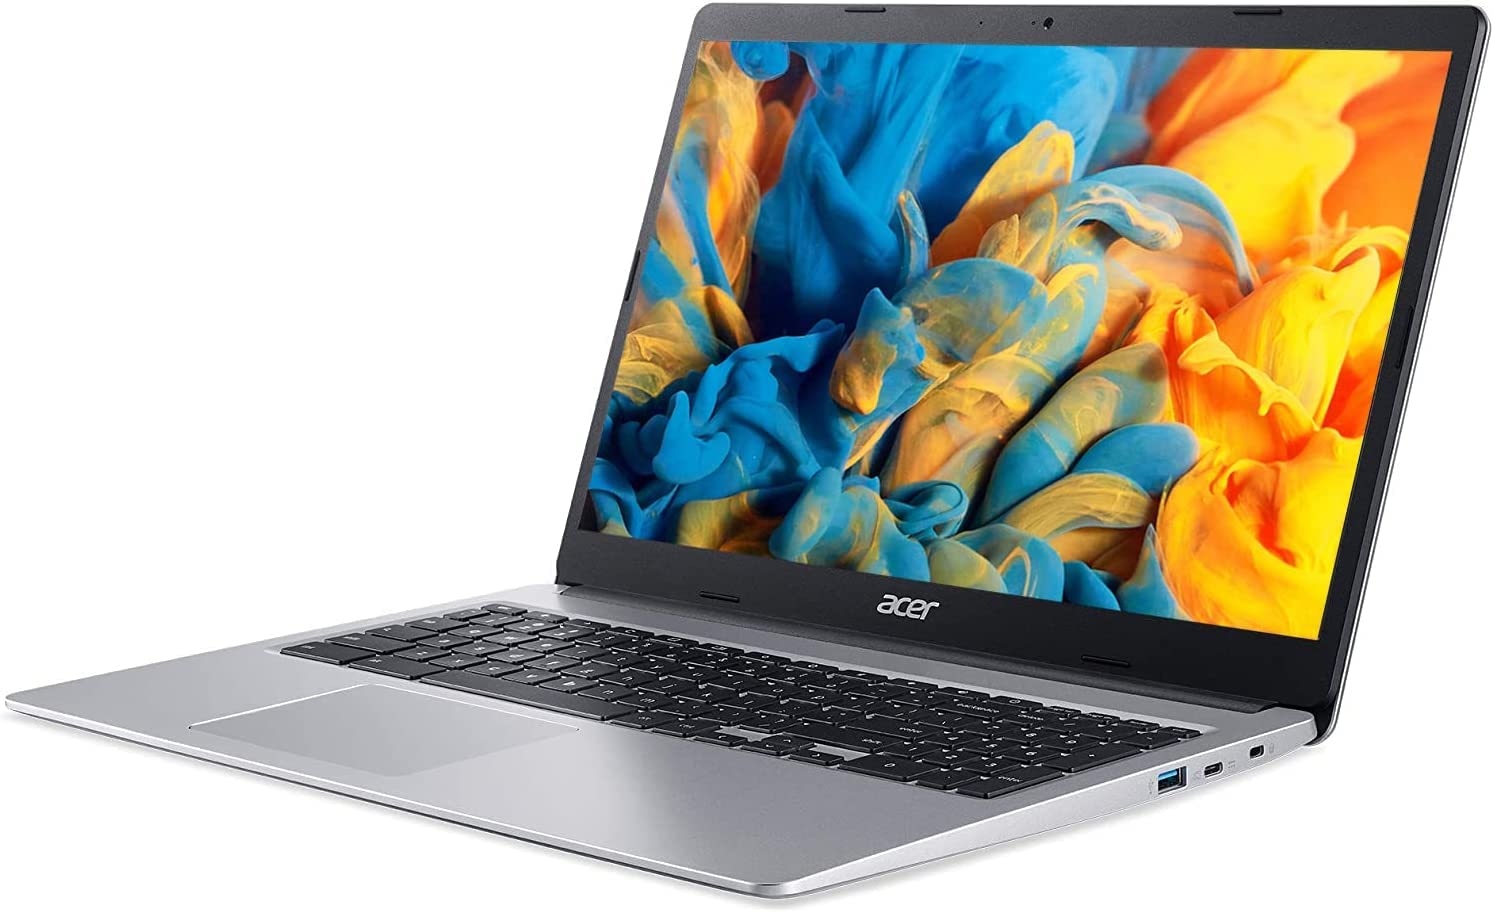 Acer 2022 15inch HD IPS Chromebook, Intel Dual-Core Celeron Processor Up to 2.55GHz, 4GB RAM, 64GB Storage, Super-Fast WiFi Up to 1300 Mbps, Chrome OS-(Renewed) (Dale Silver)